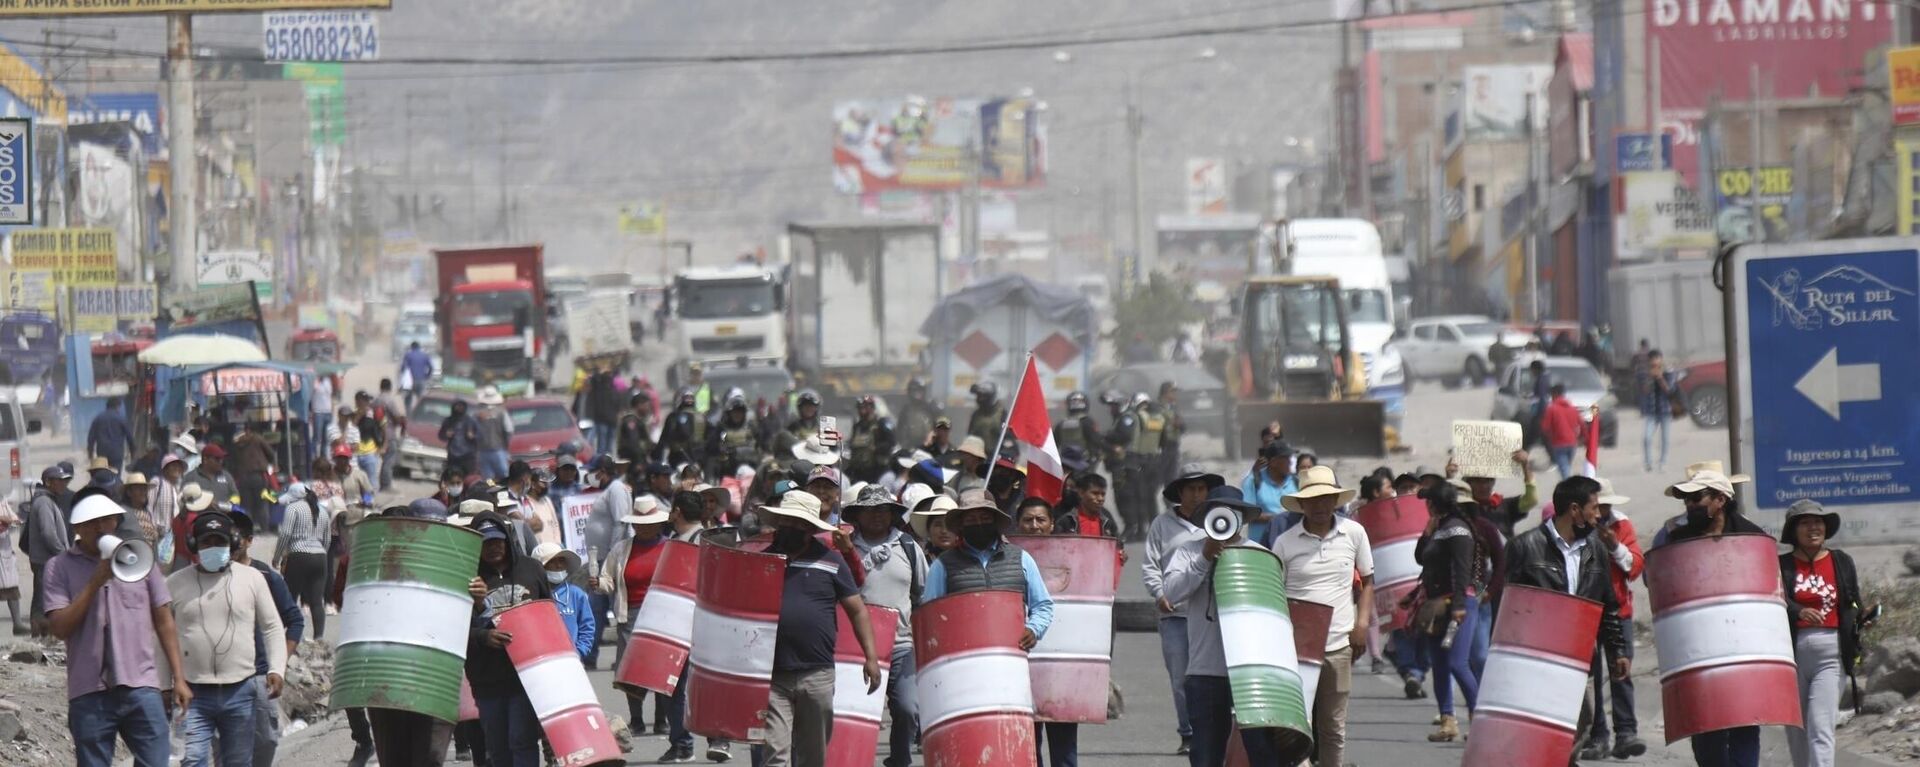 Demonstrators march with makeshift shields during a protest against President Dina Boluarte's government and Congress, in Arequipa, Peru, Wednesday, Jan. 4, 2023. Wednesday marks the resumption of protests against Boluarte that followed the ouster of her predecessor, Pedro Castillo, after he tried to dissolve Congress. - Sputnik International, 1920, 04.05.2023